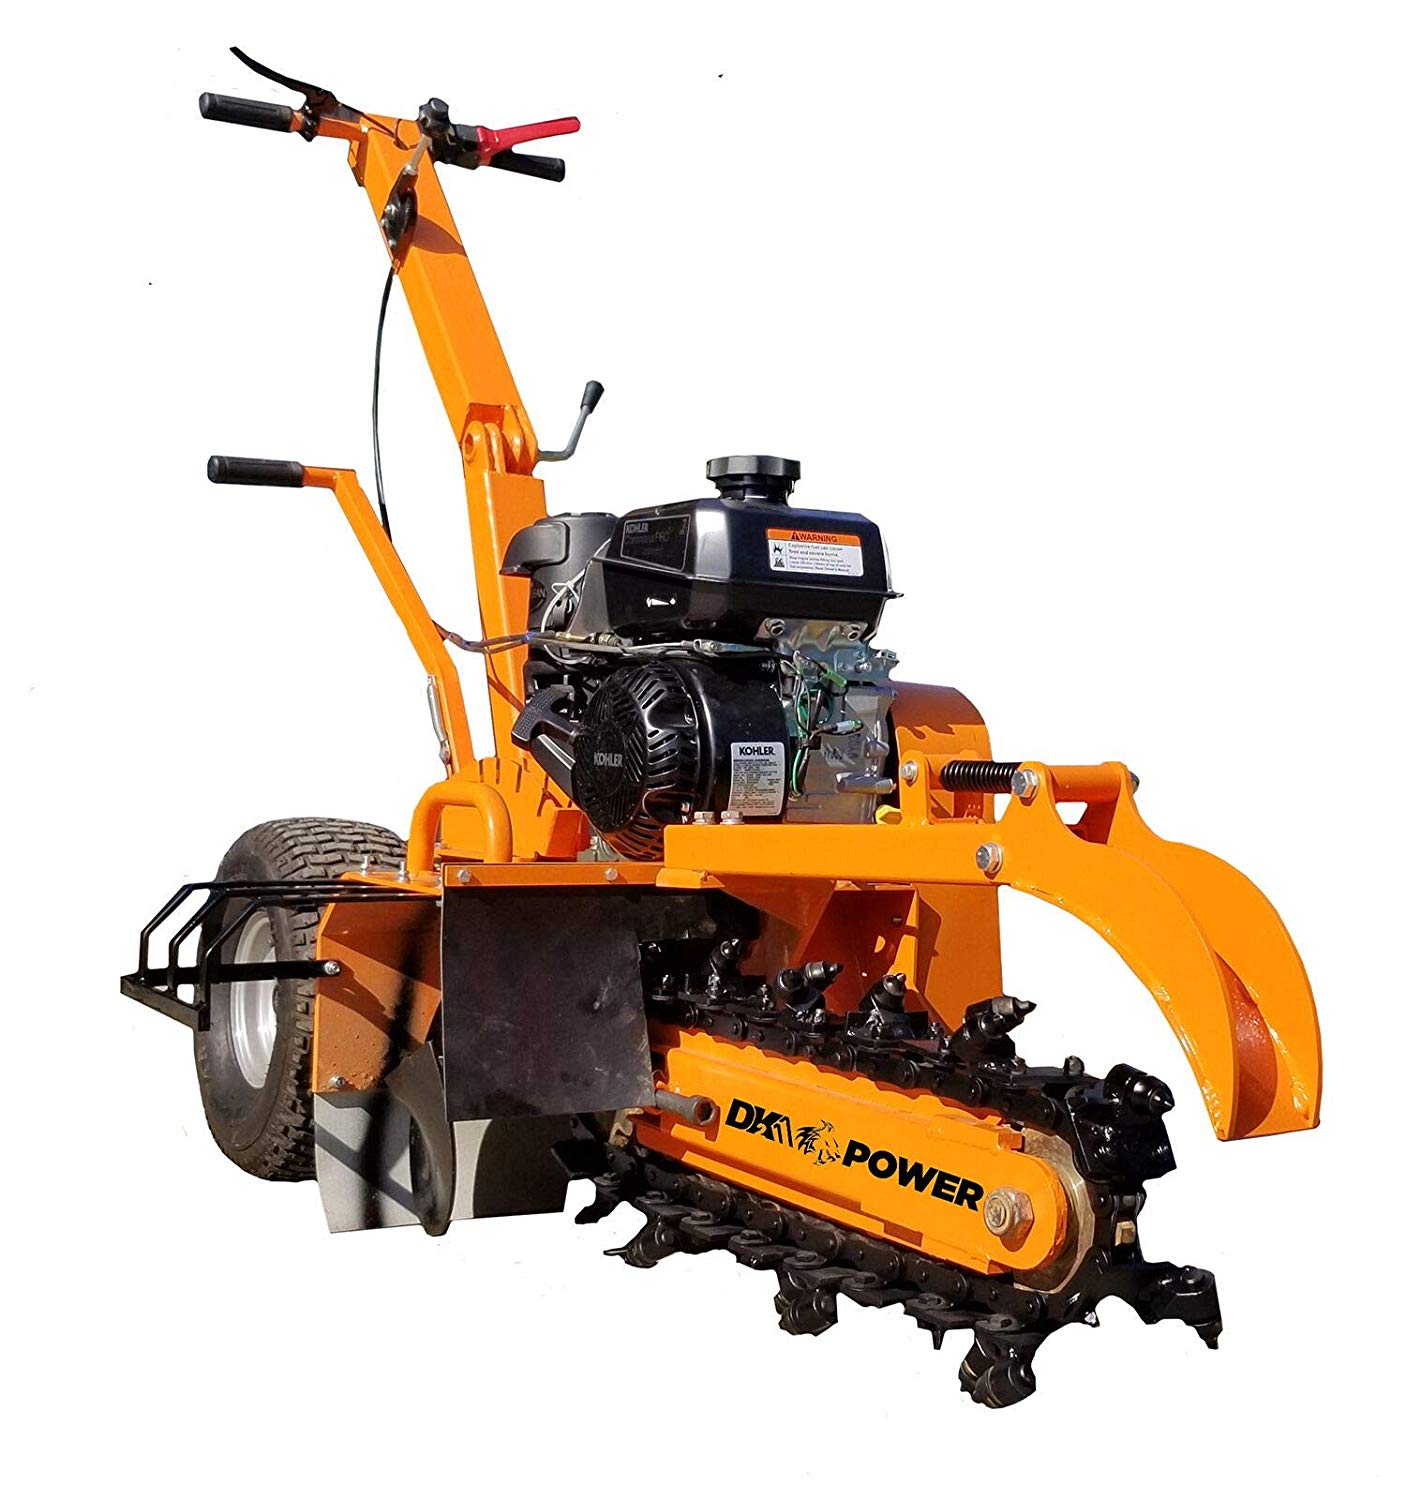 18 INCH TRENCHER